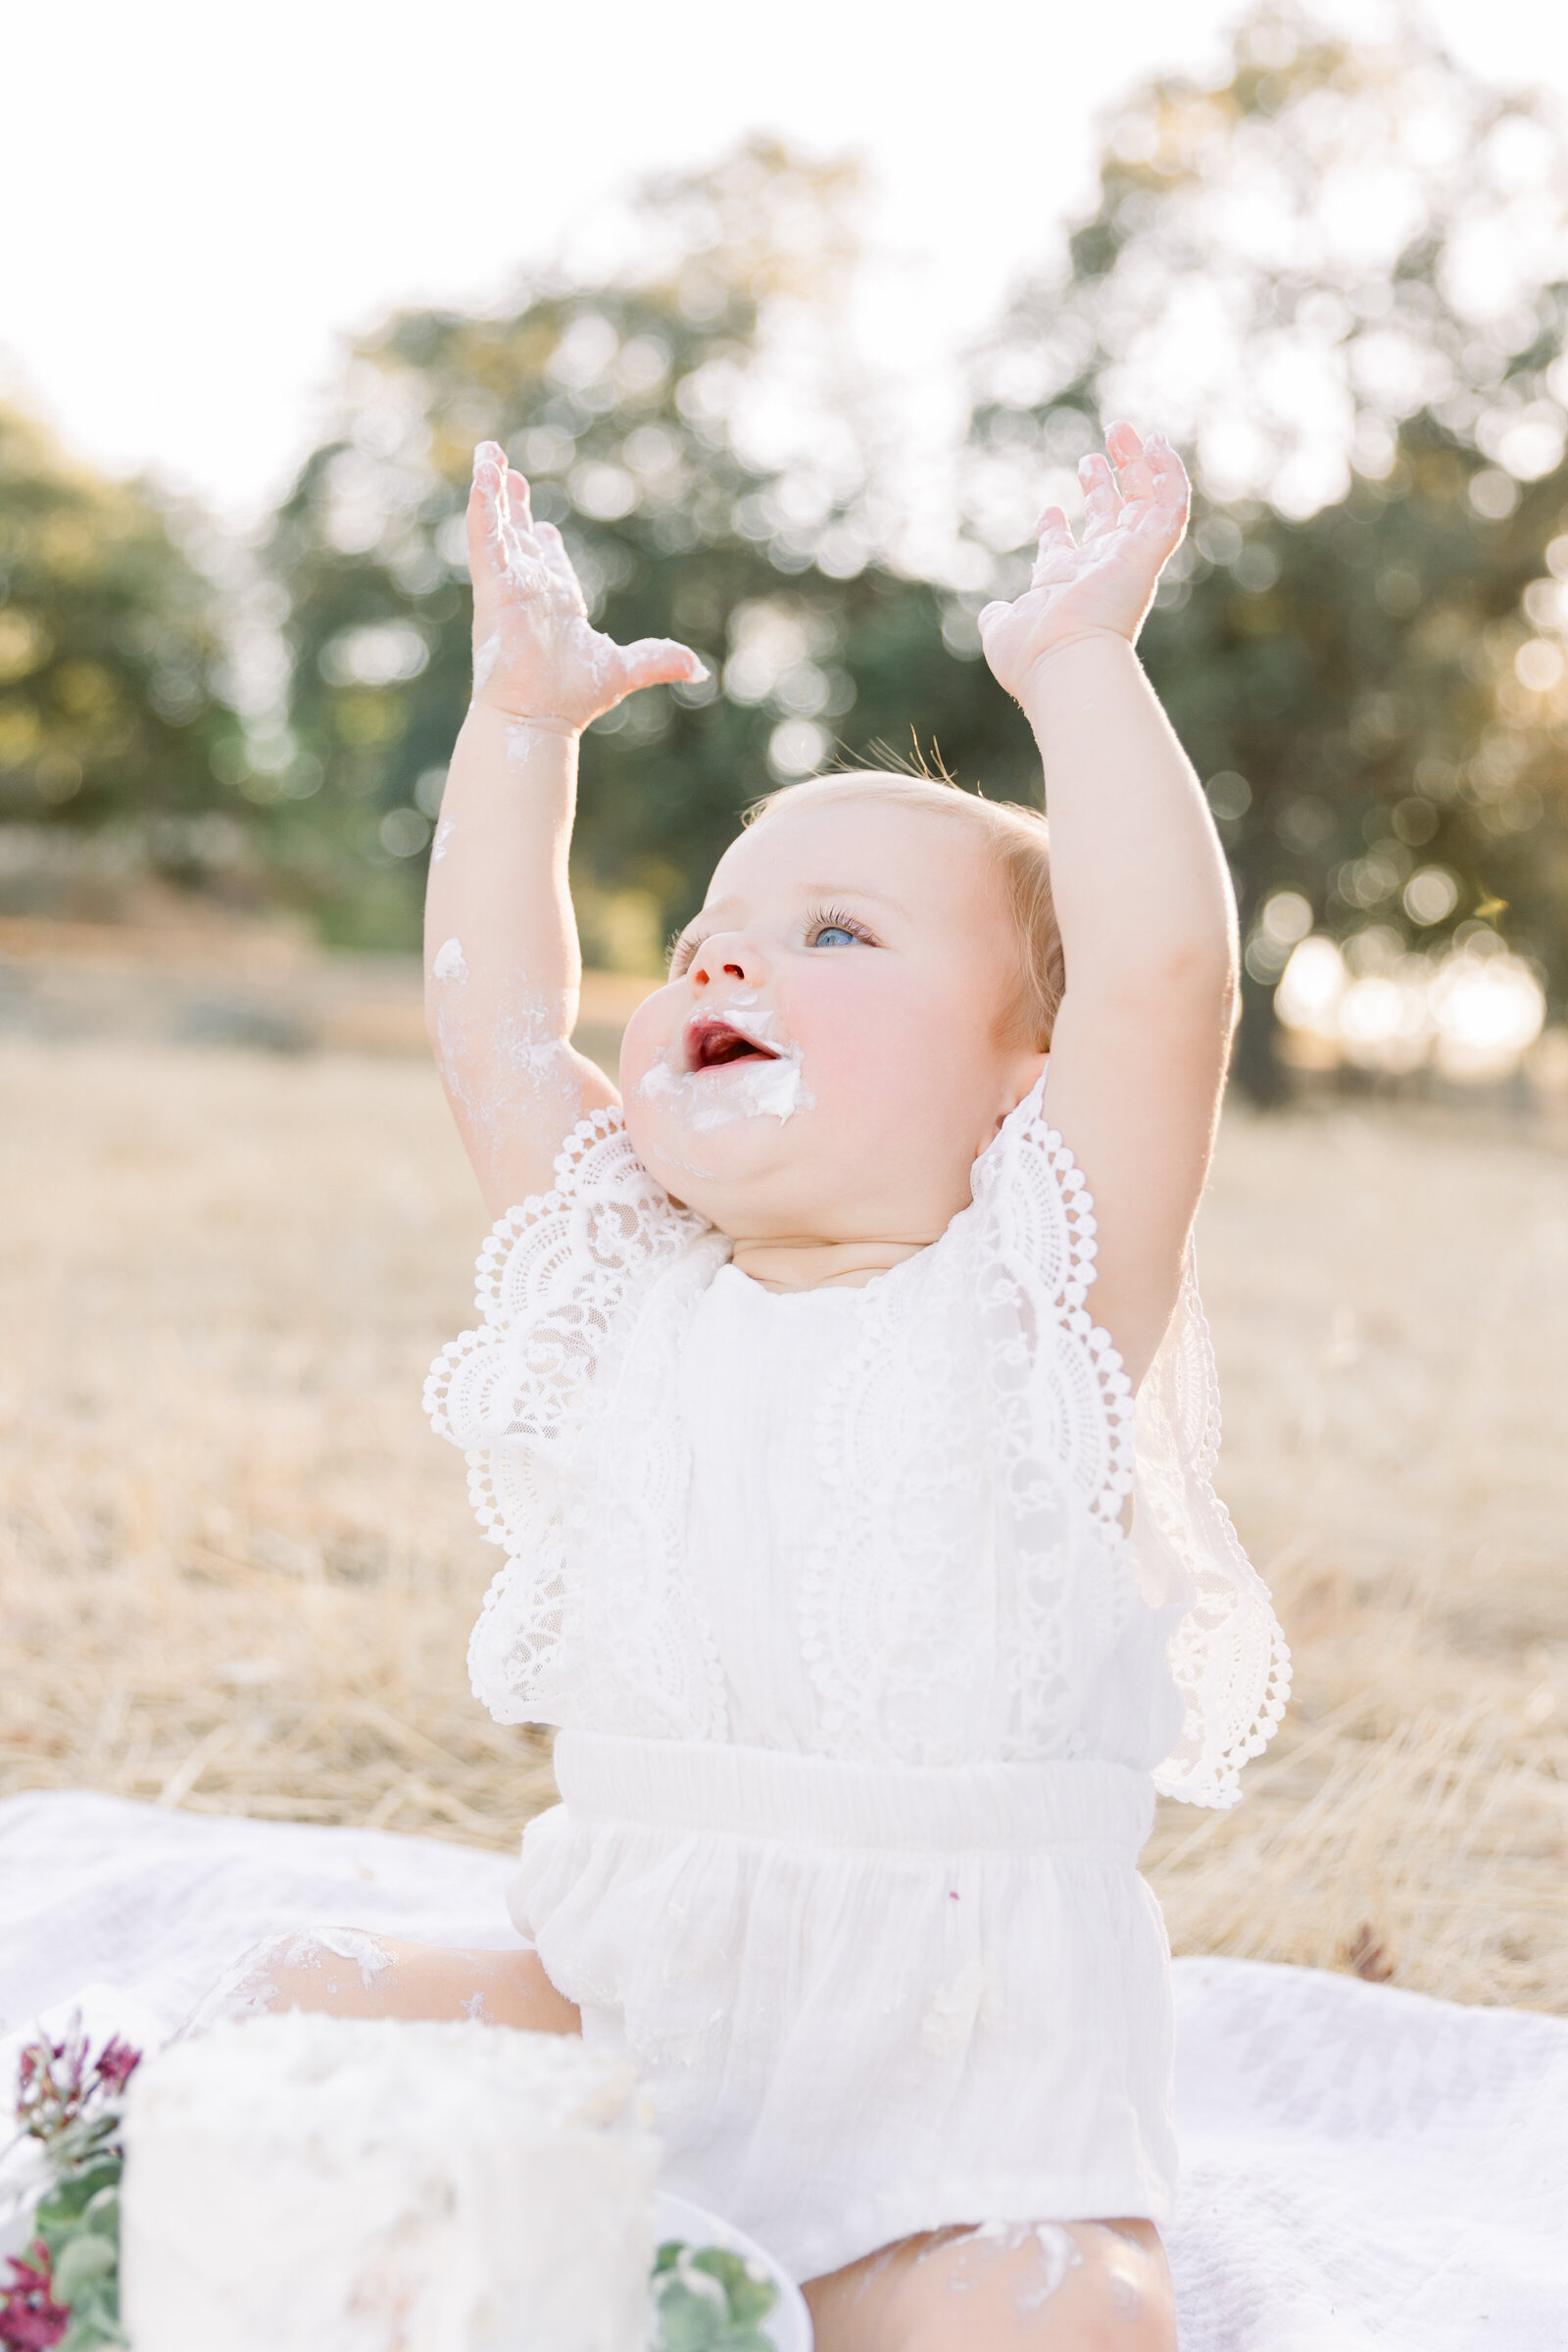 One year old baby with small cake and hands in the air taken by Sacramento Newborn Photographer Kelsey Krall